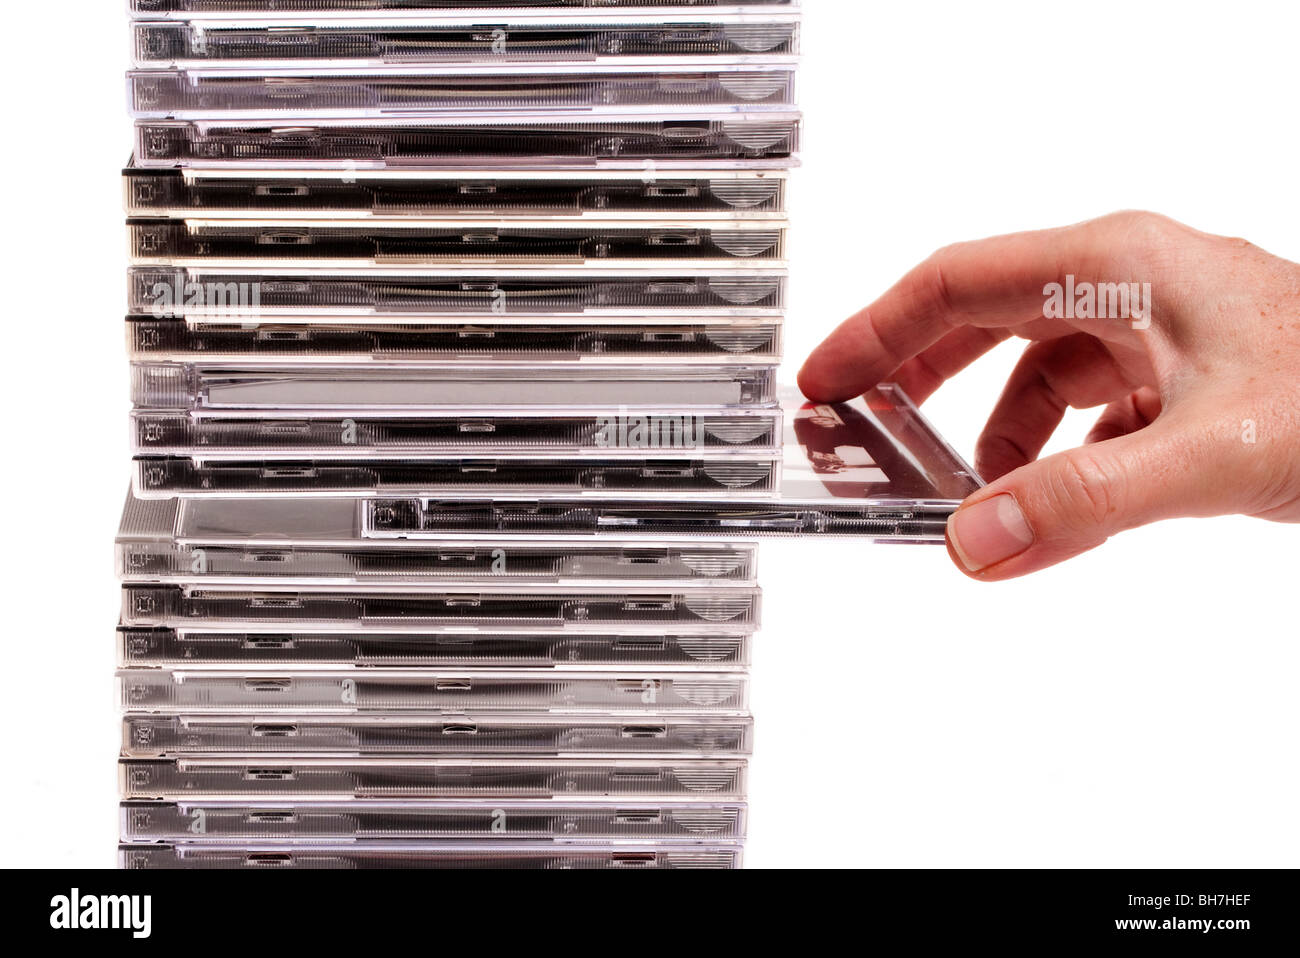 taking cd case from tower Stock Photo